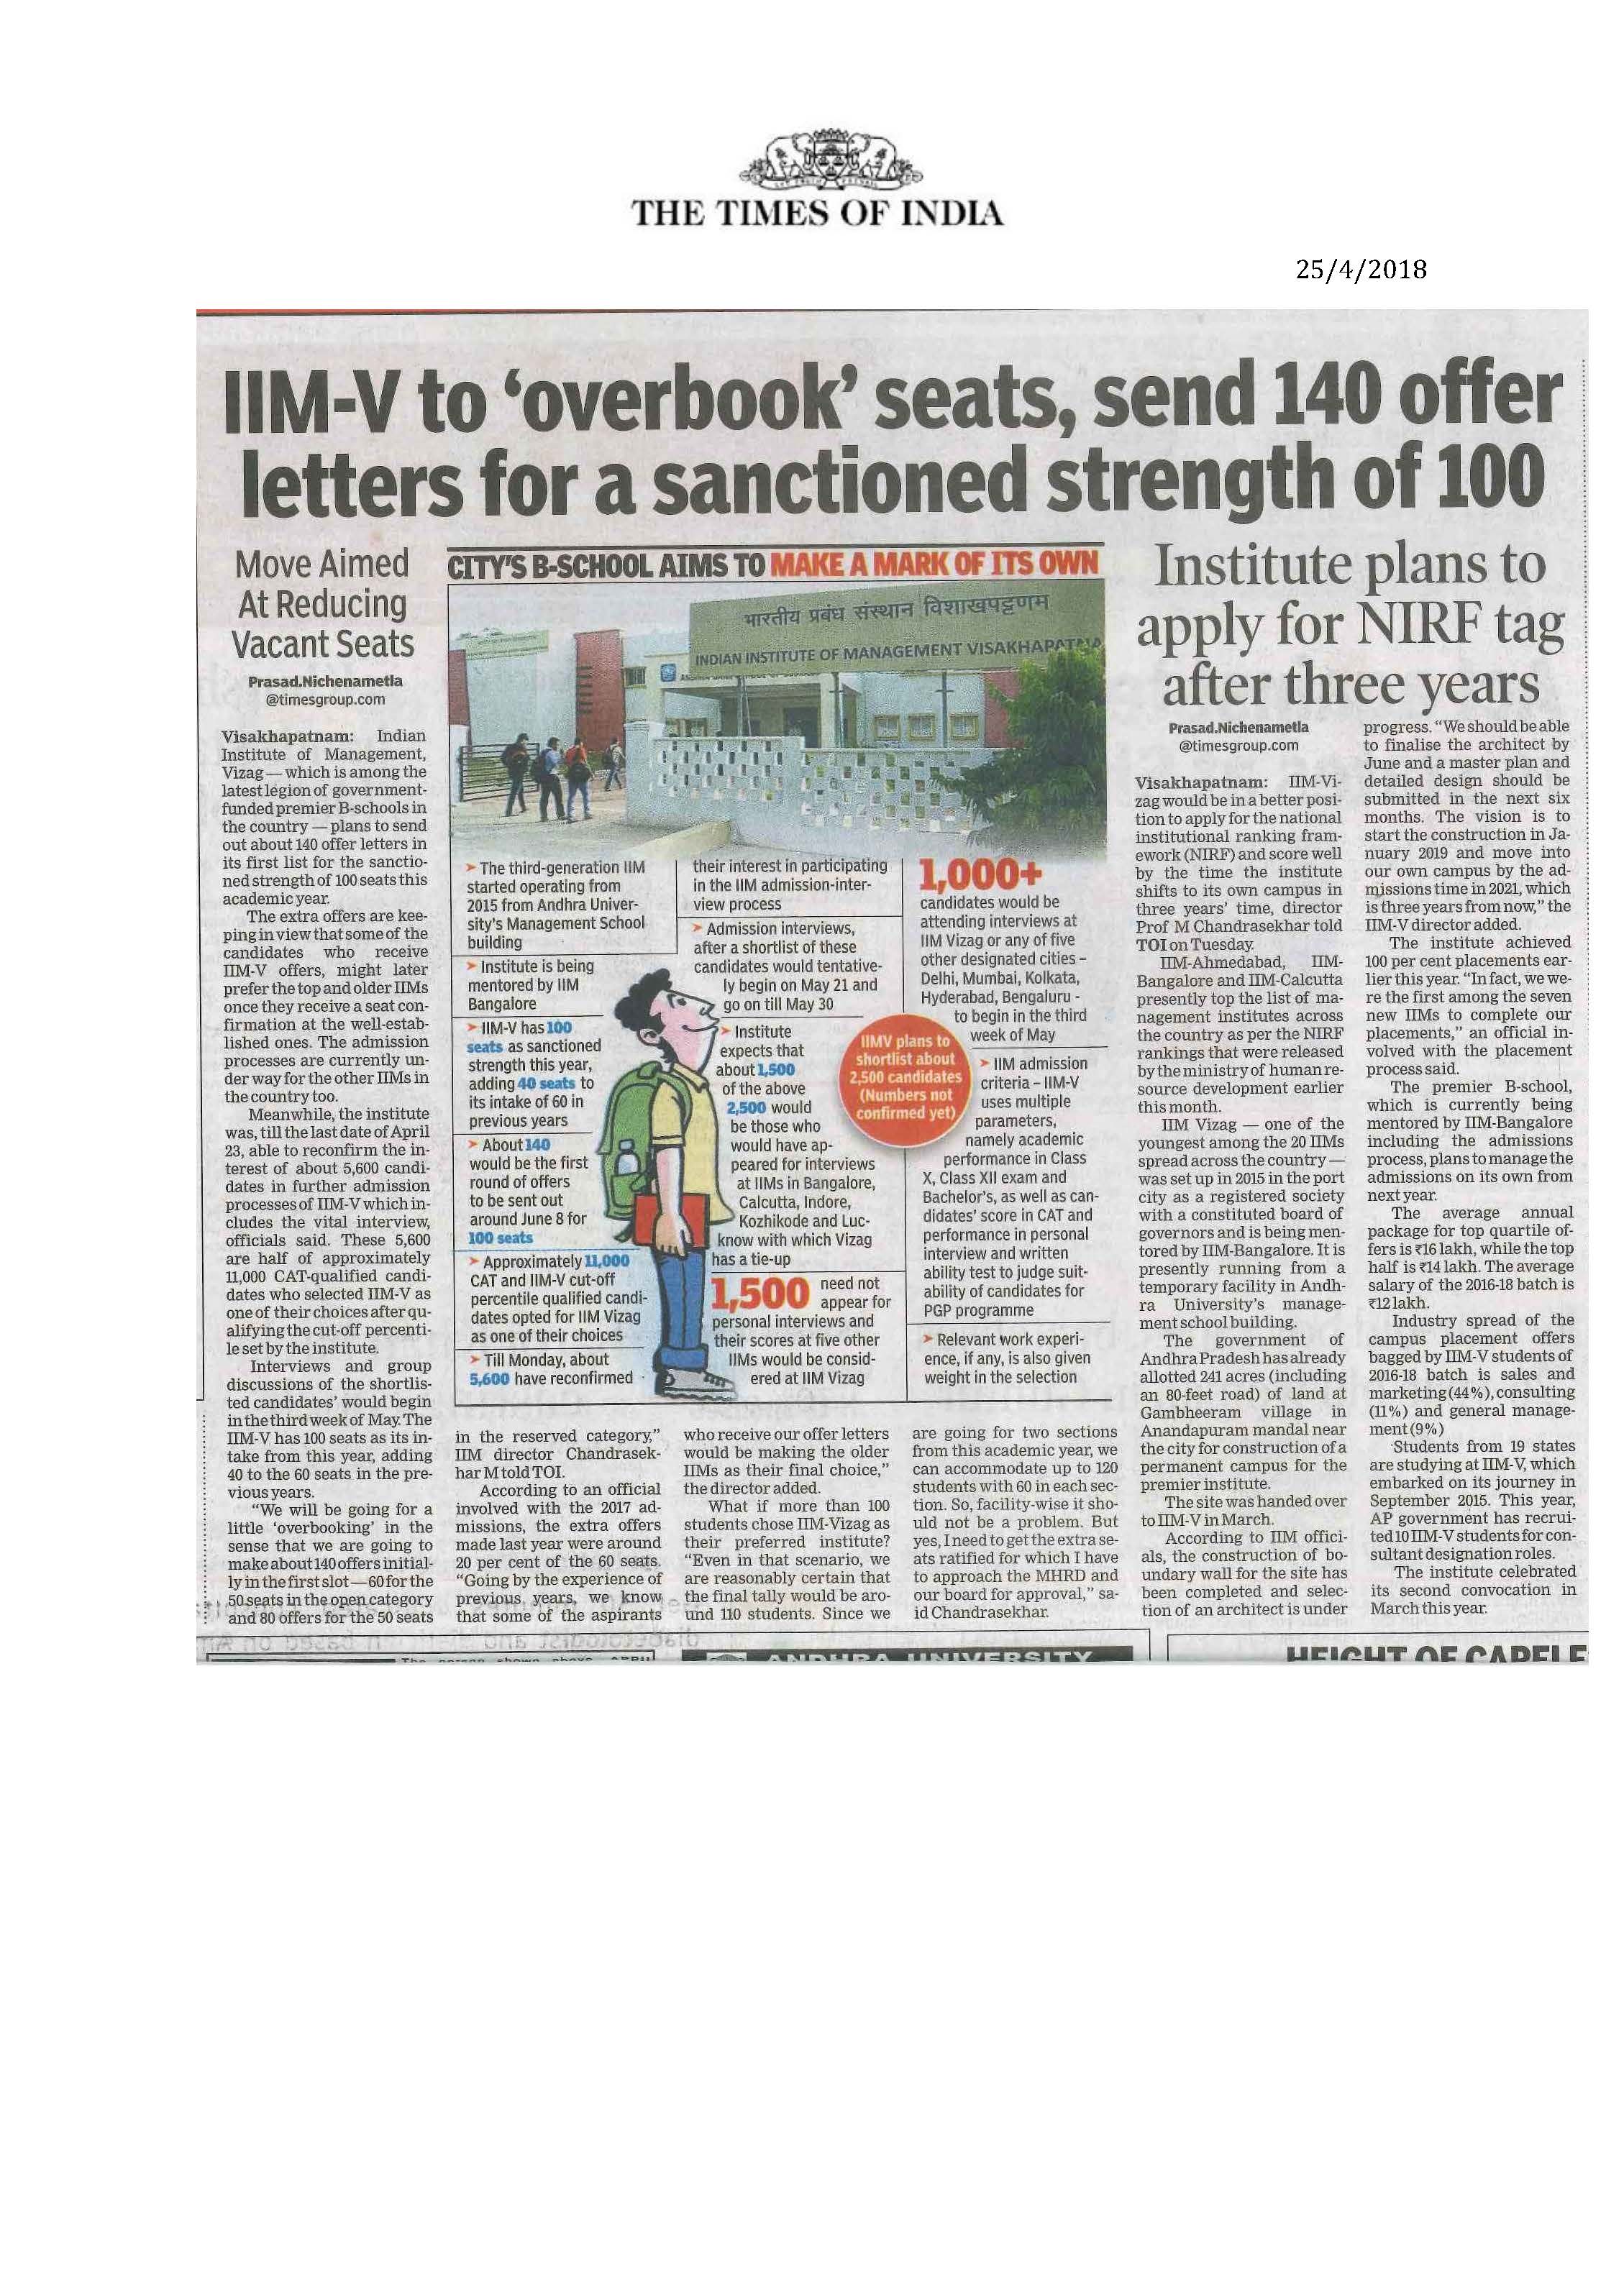 IIMV to overbook seats send 140 offer letters for a sanctioned strength of 100 - 25.04.2018